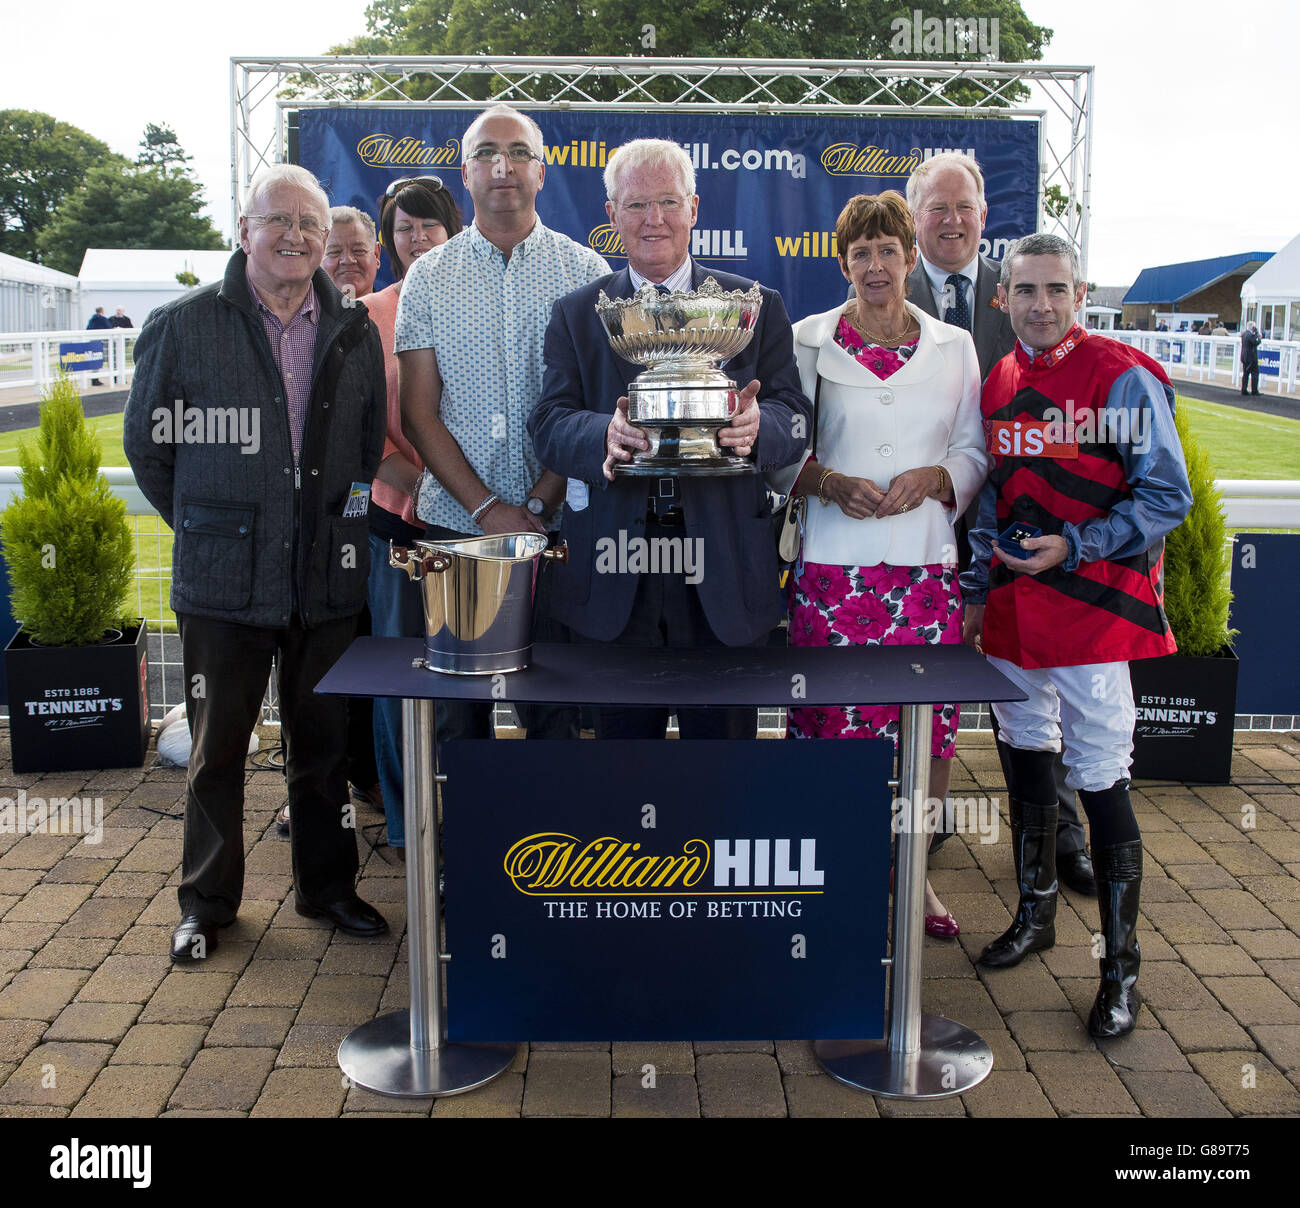 Mistiroc ridden by Feral Lynch, Trained by Jim Goldie and owned by Drew and Ailsa Russell, collect the trophy after winning the William Hill Handicap Stakes during day one of the Gold Cup Festival at Ayr Racecourse. PRESS ASSOCIATION Photo. Picture date: Thursday September 17, 2015. See PA story RACING Ayr. Photo credit should read: Craig Watson/PA Wire Stock Photo